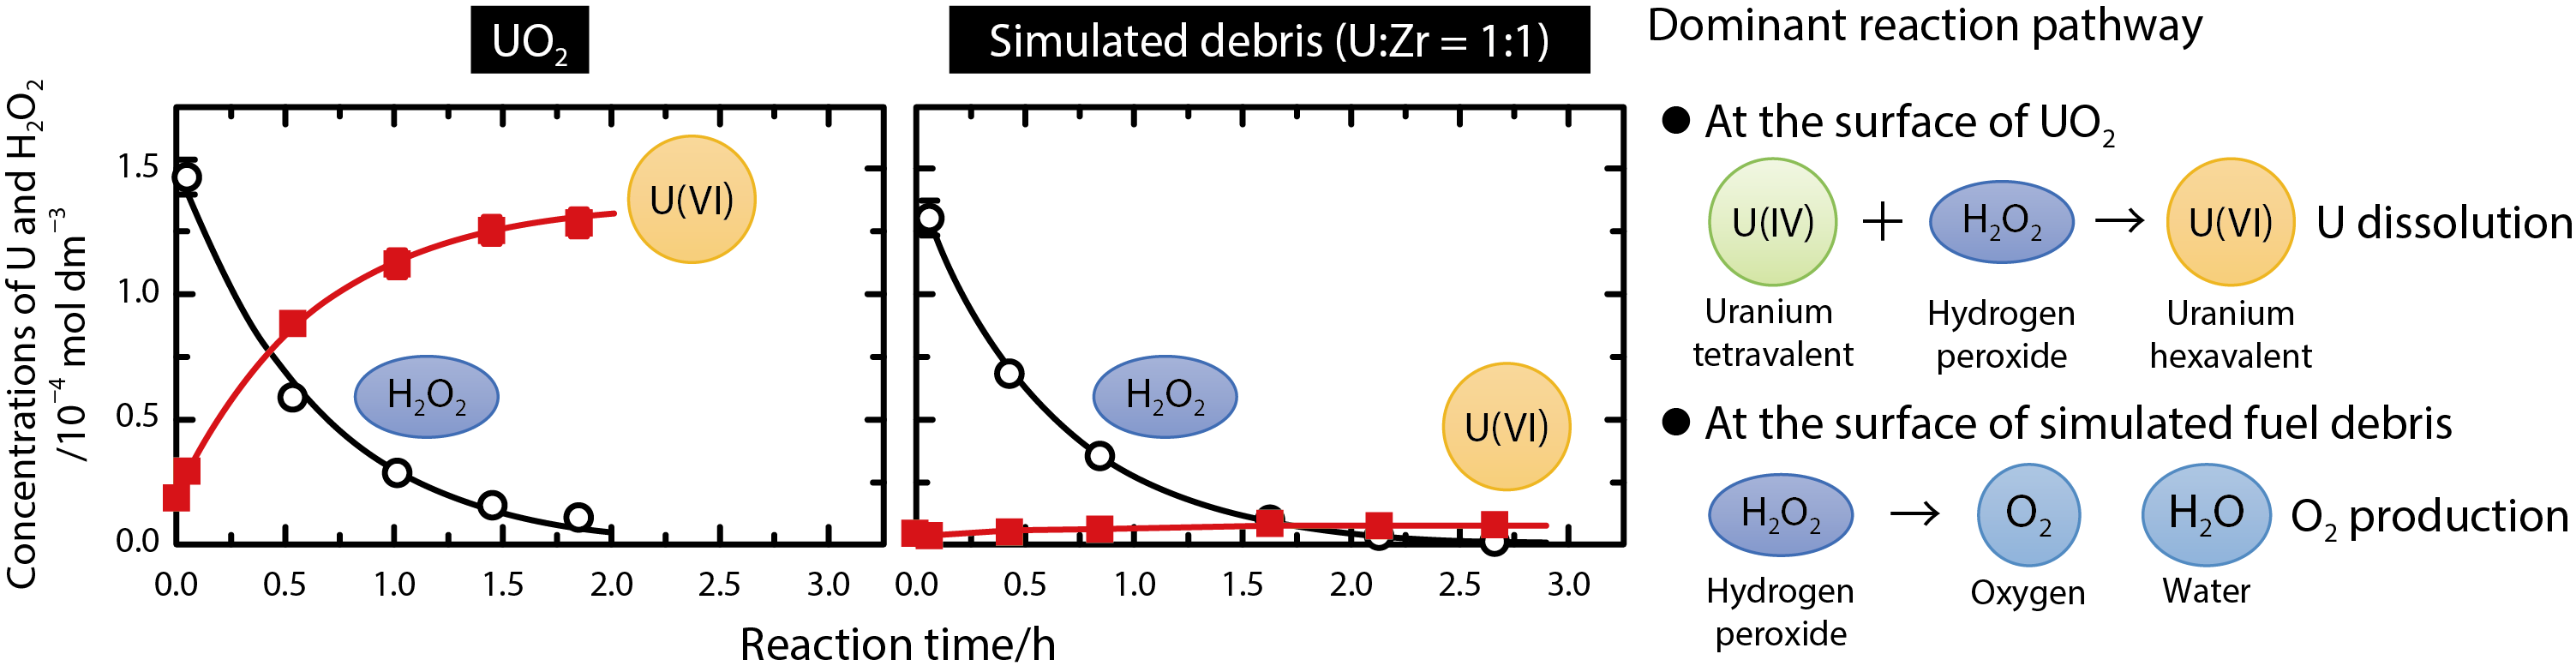 Fig.1-10  Comparison of the H2O2 reaction kinetics between UO2 and the simulated fuel debris